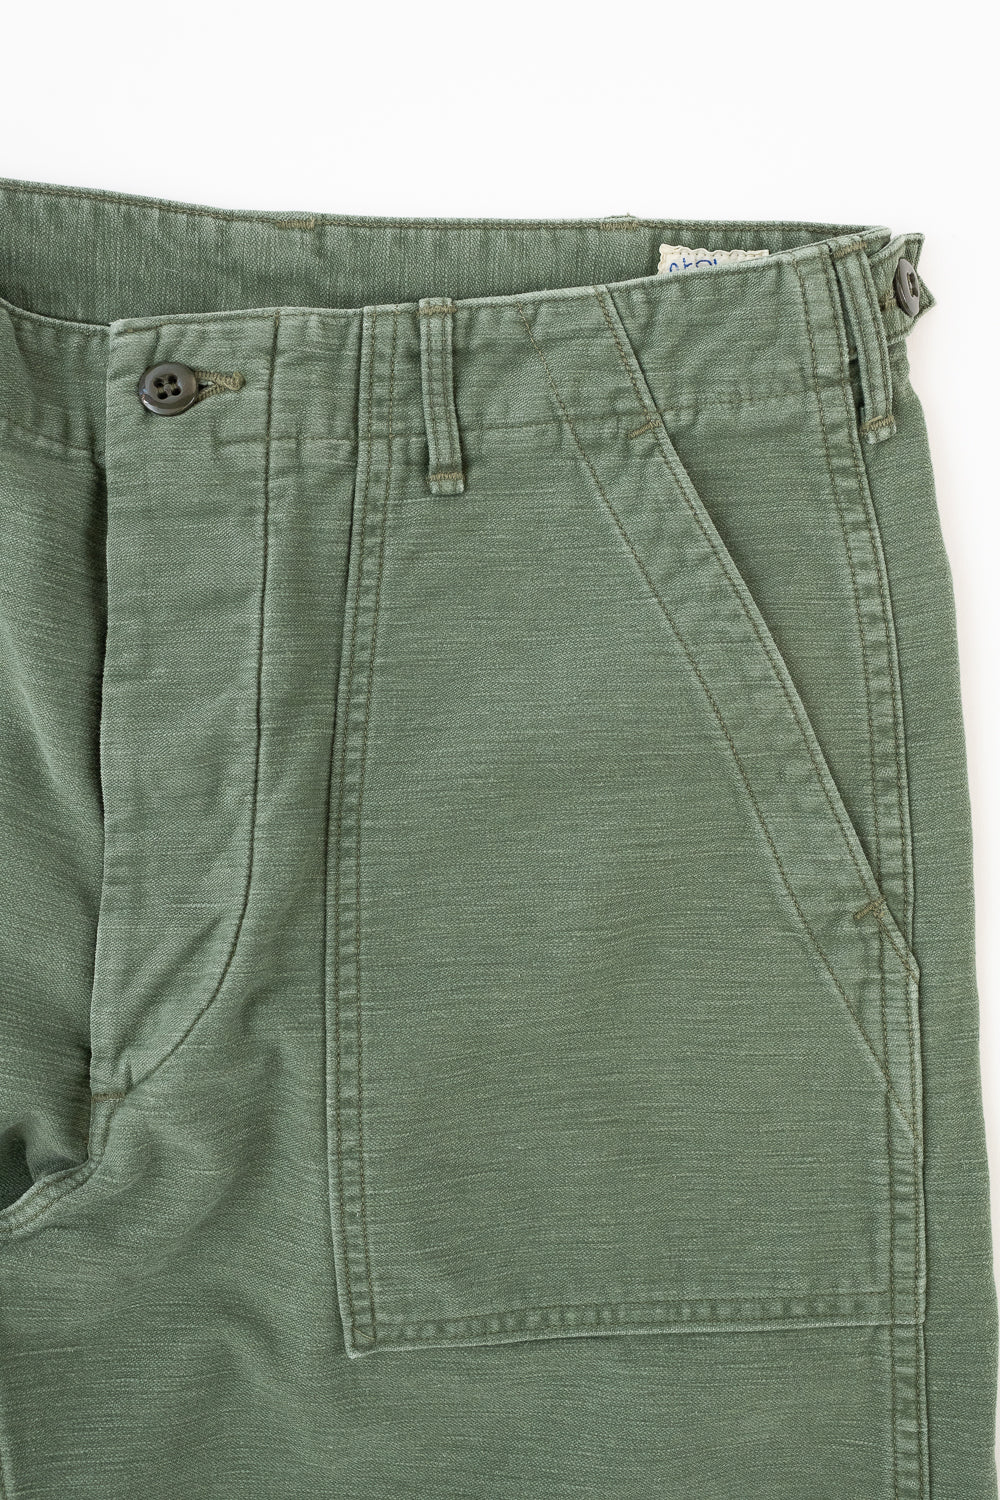 OrSlow US Army Fatigue Pants Regular Fit, Green Used